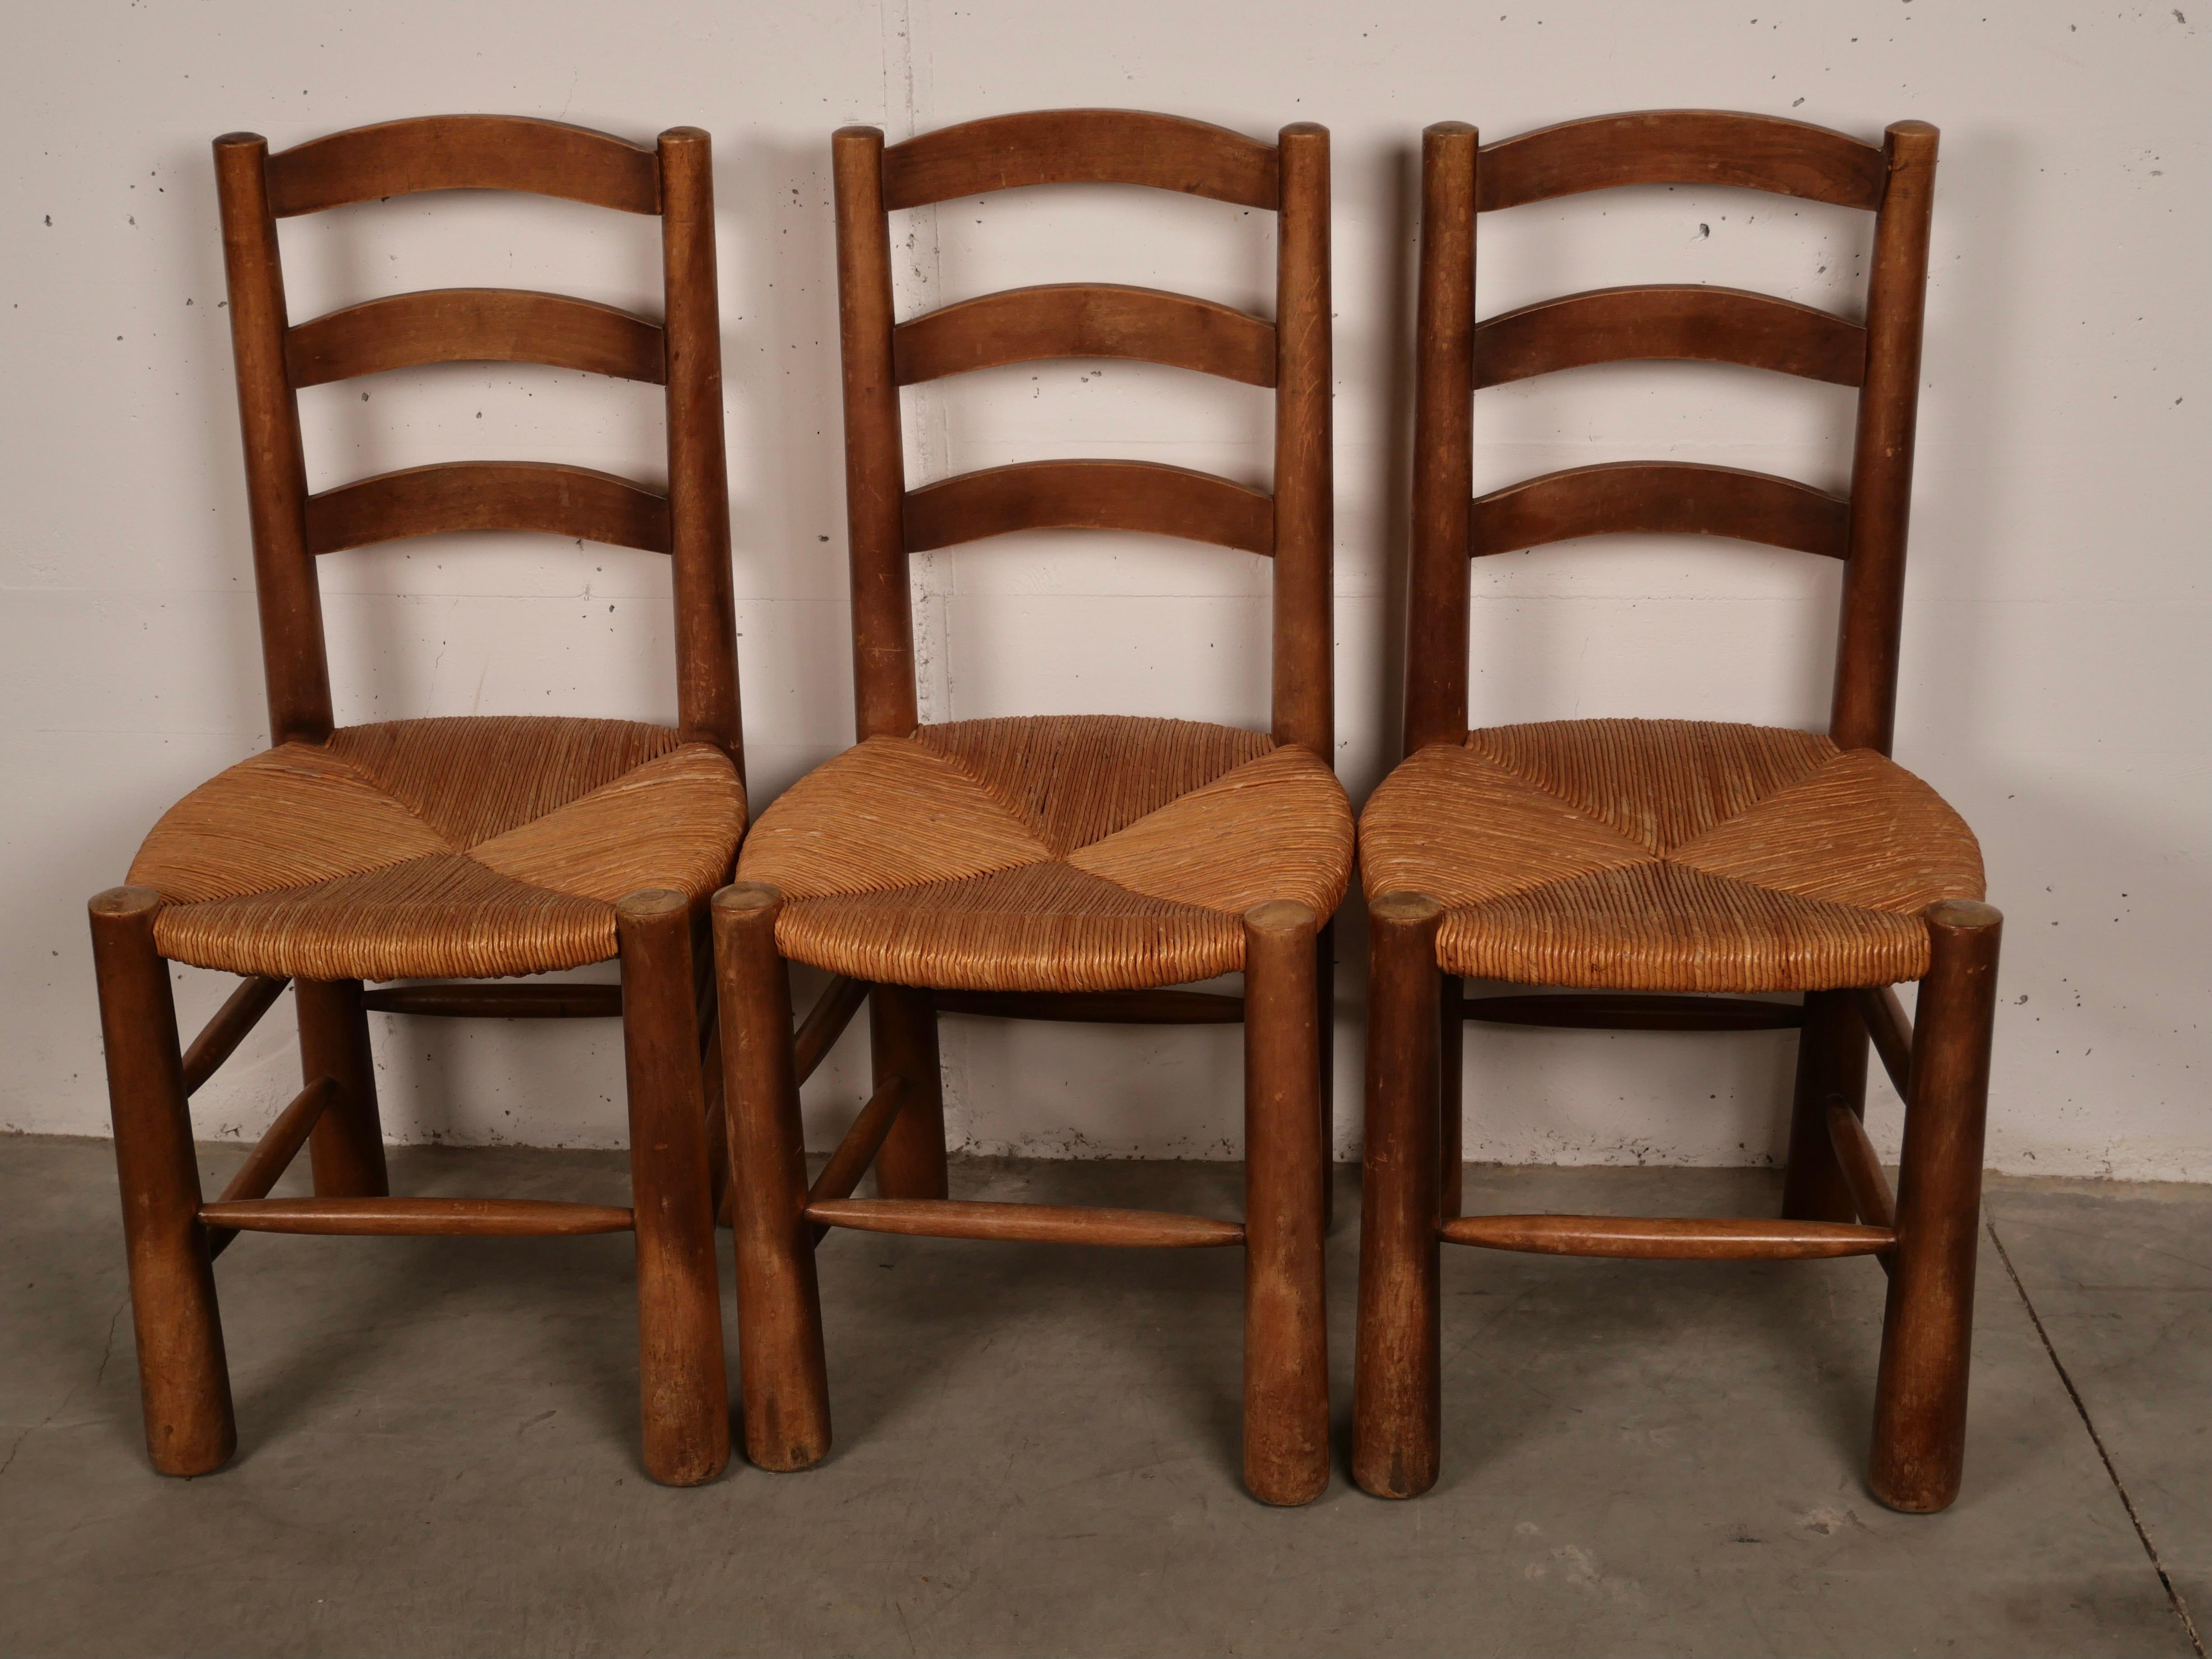 Set of 6 Mountain or chalet chair made by Meubles Georges Robert french cabinetmaker in the 1950's. The structure is in solid oak with conical legs. The seat and backrest are in woven straw reminiscent of the work done for Charlotte Perriand